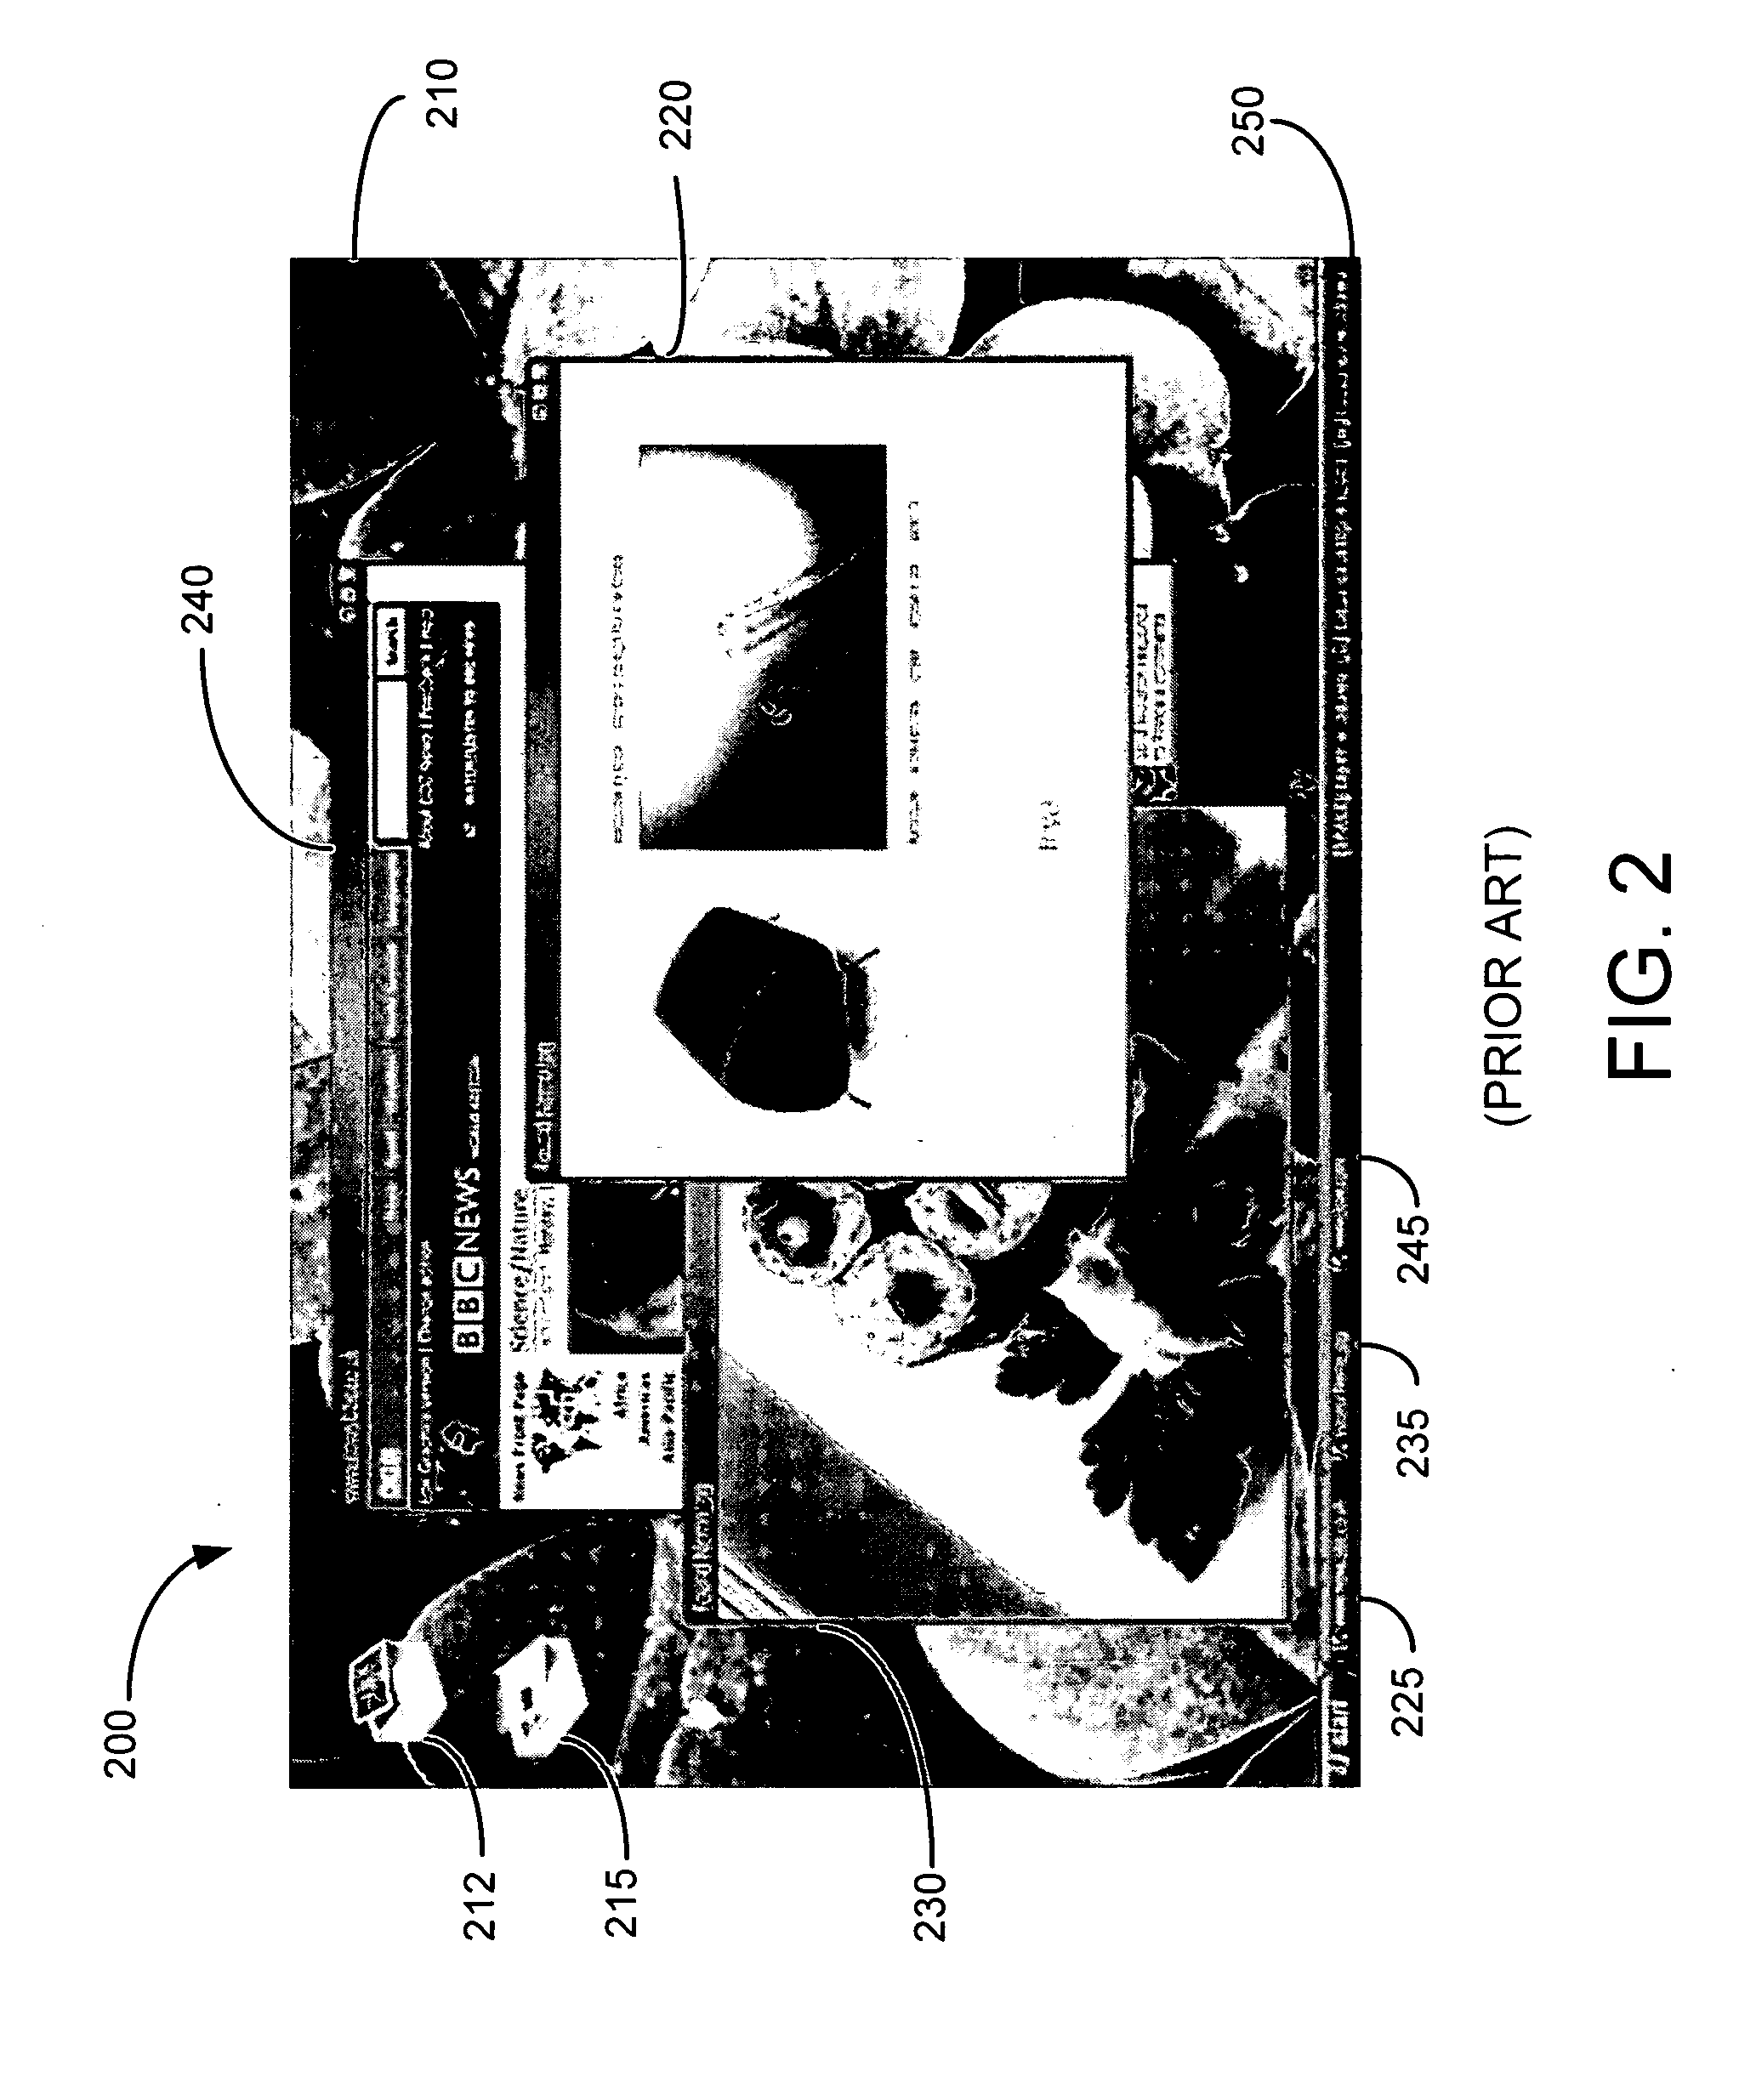 System and method for visually expressing user interface elements